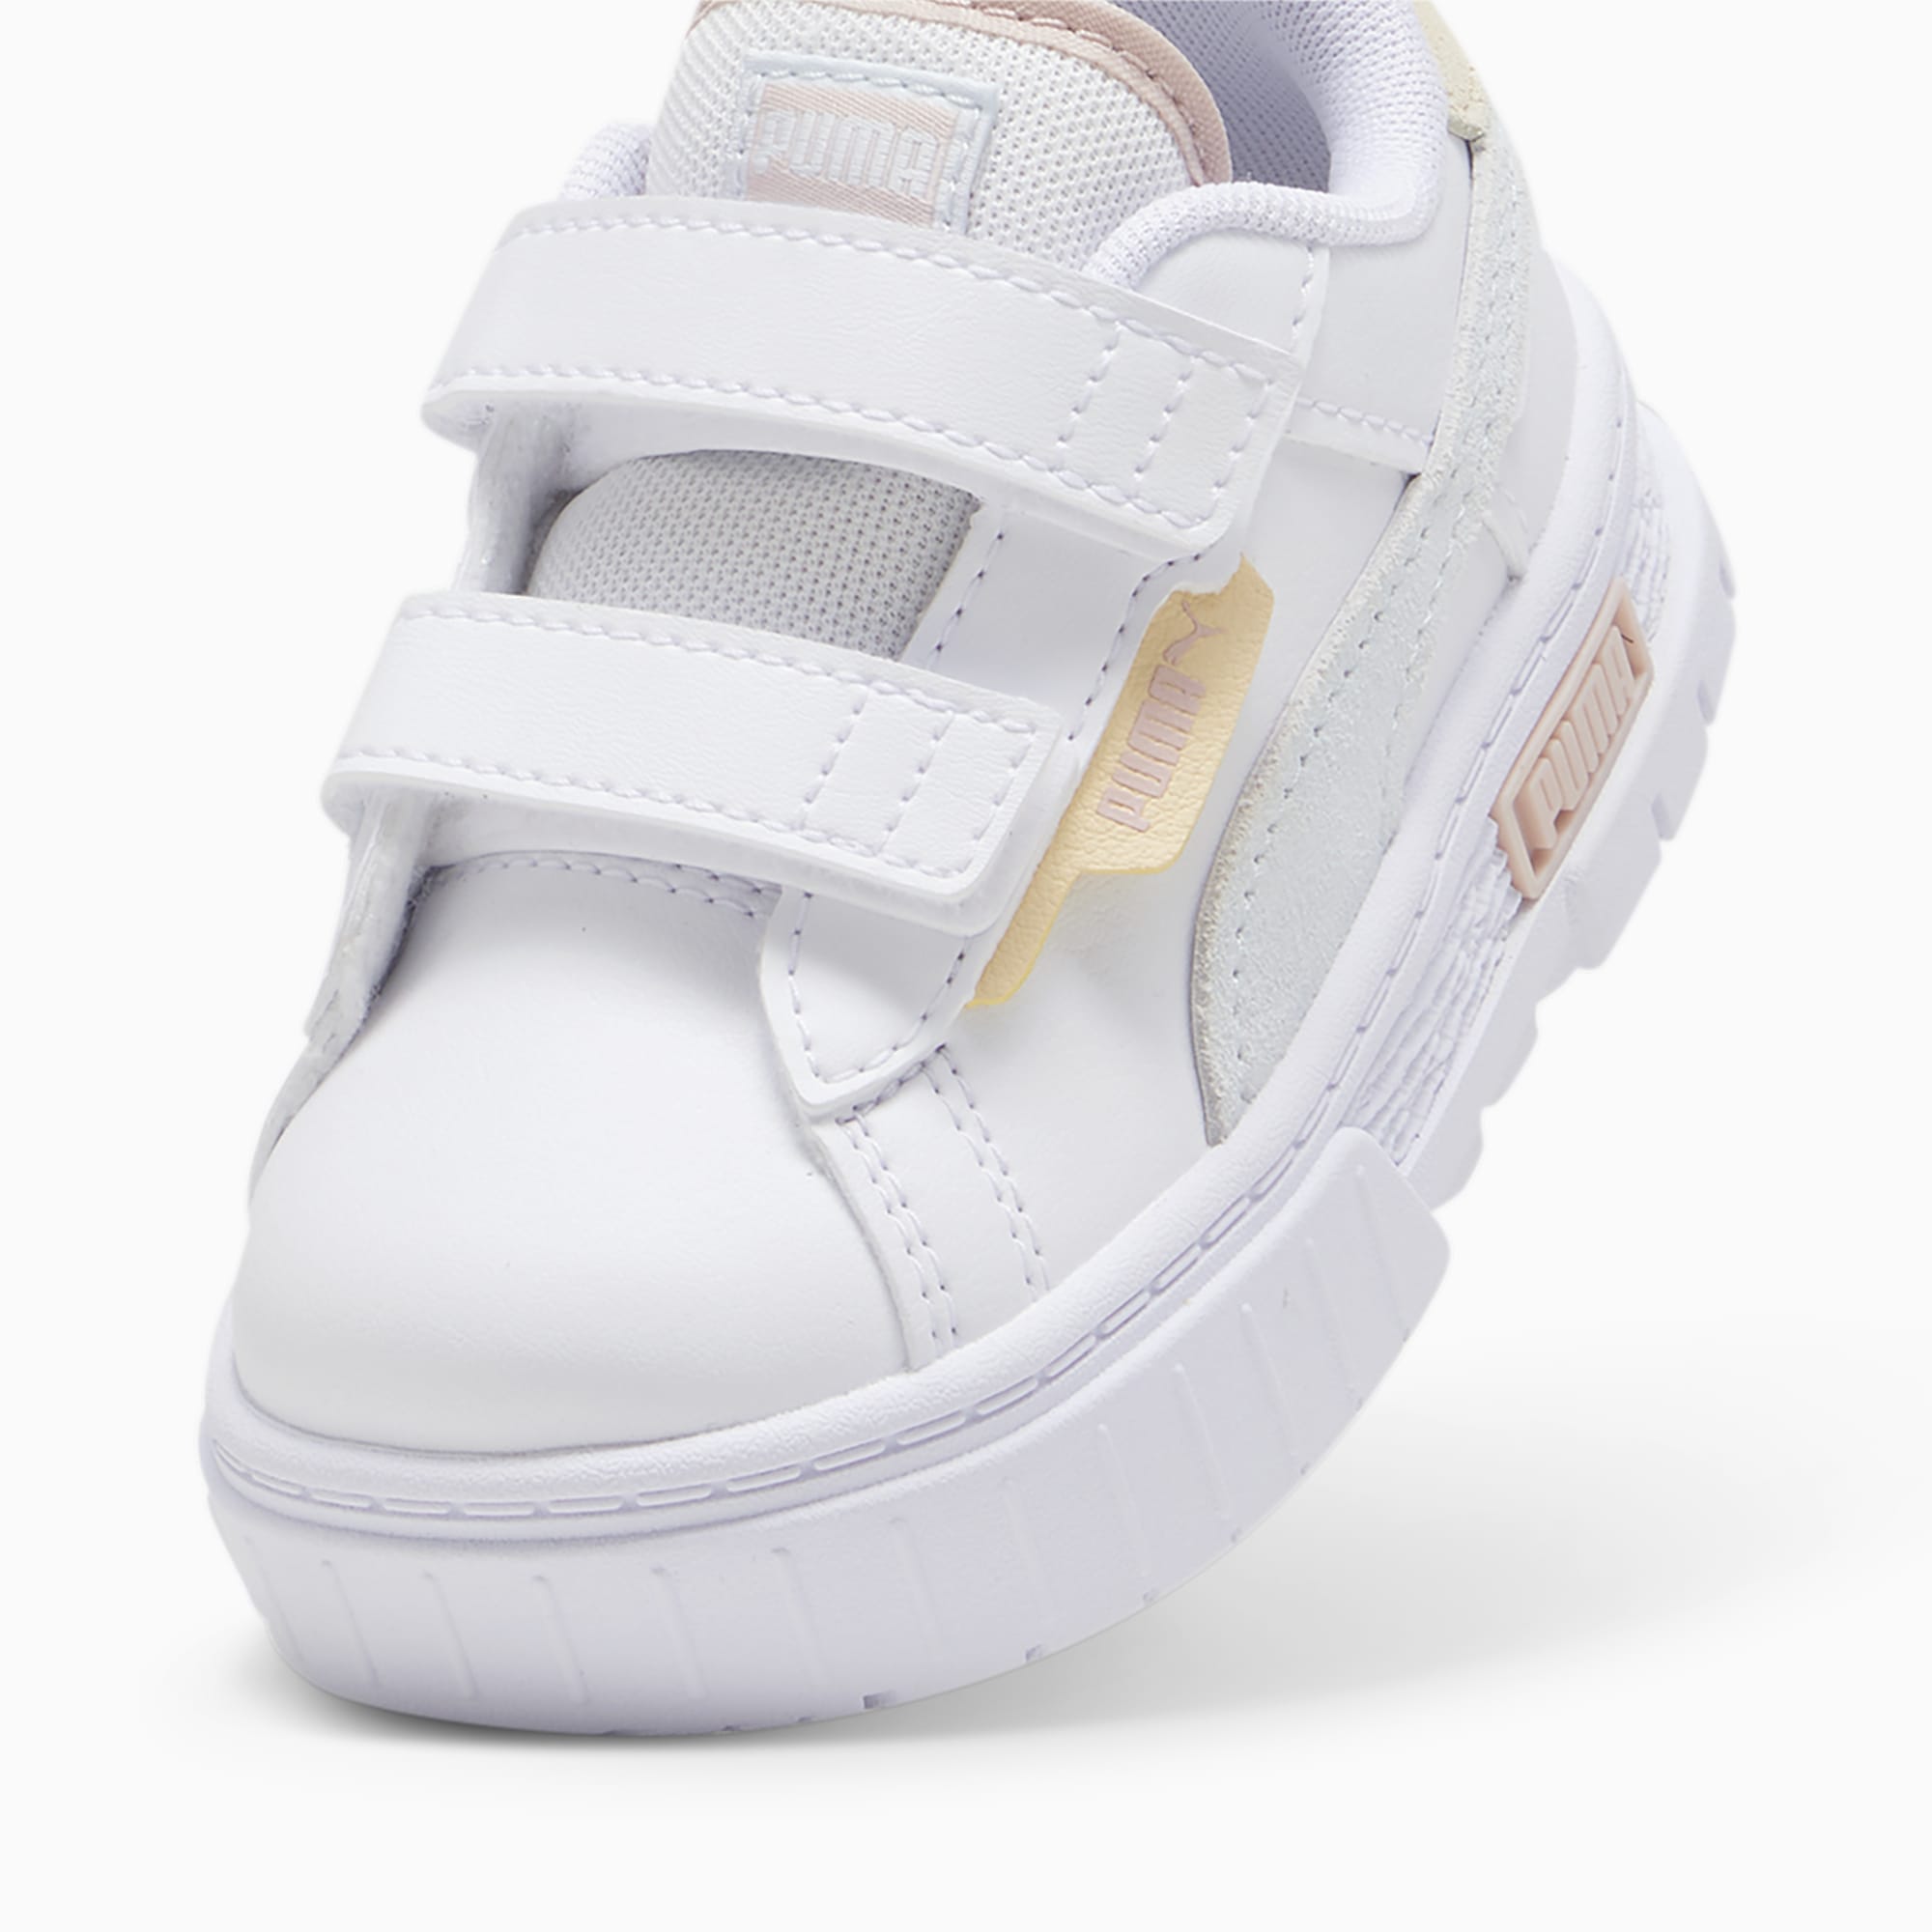 PUMA Mayze Crashed Toddlers' Sneakers, White/Dewdrop, Size 22, Shoes